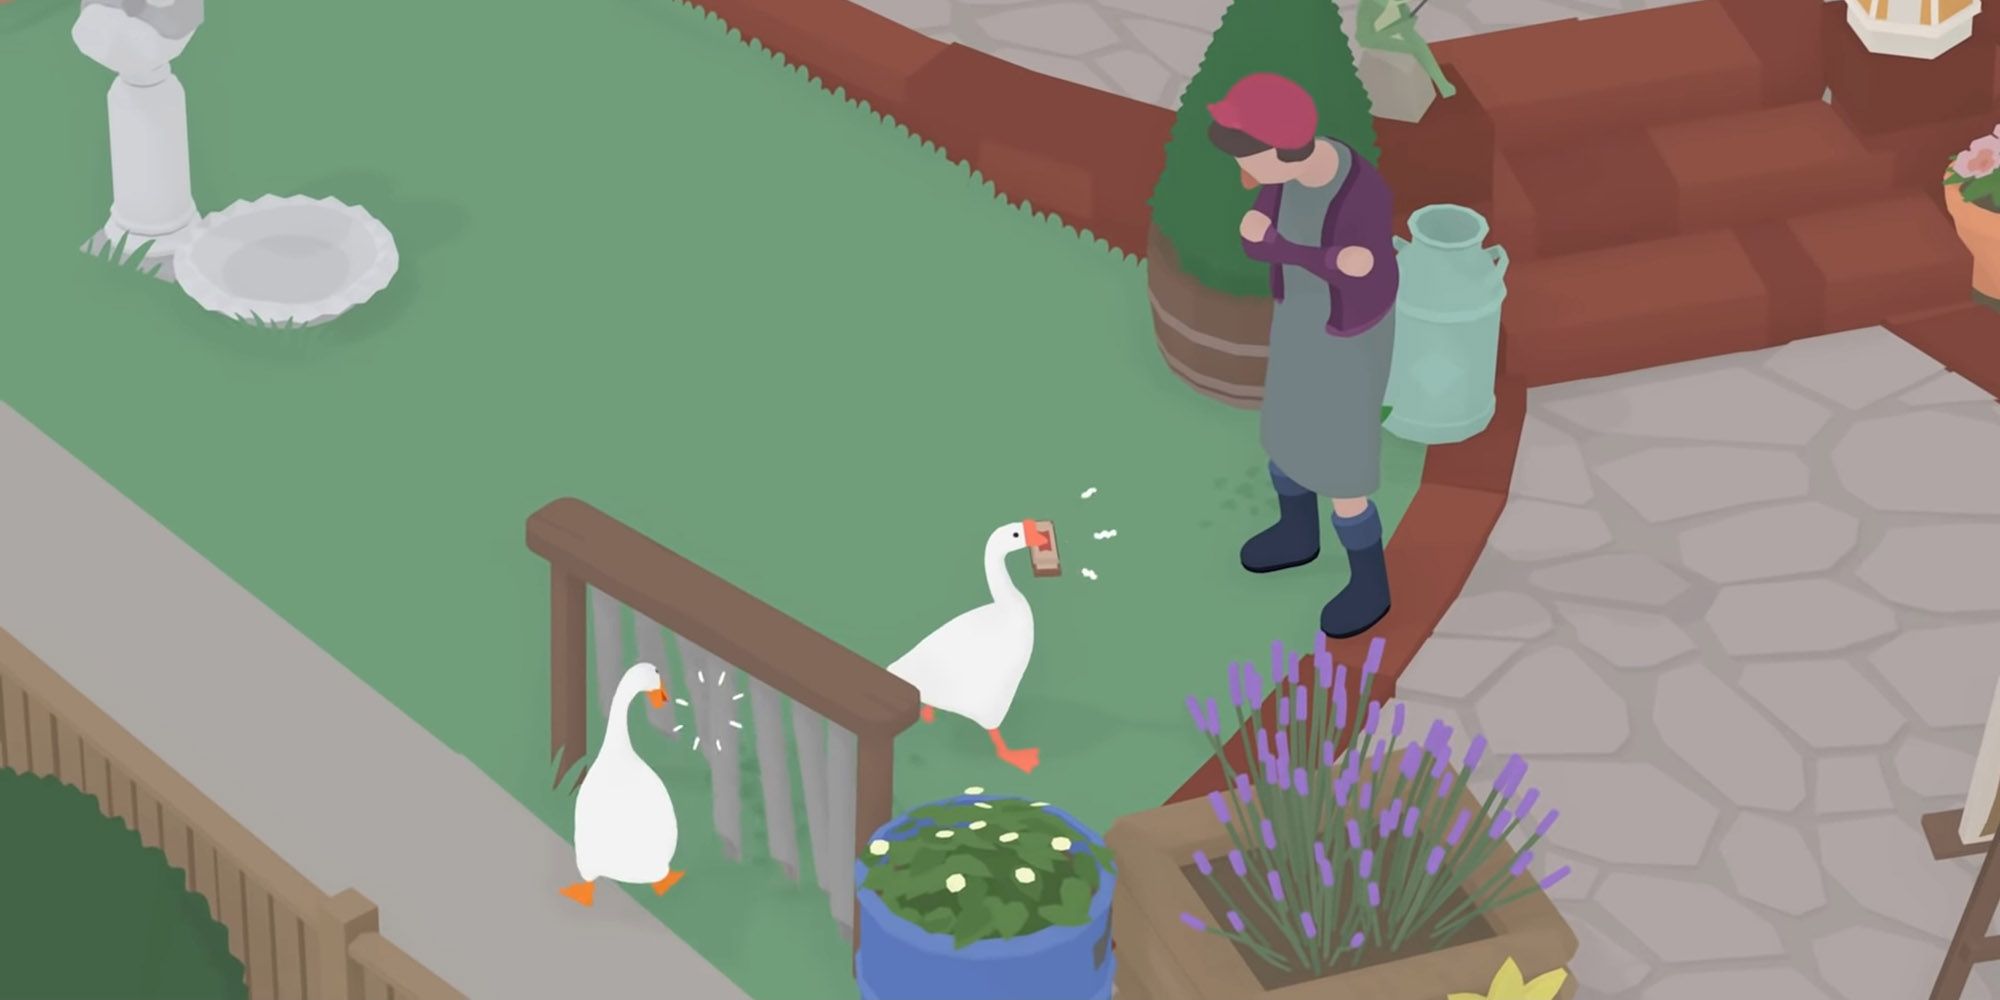 The Goose honking at a woman in Untitled Goose Game.